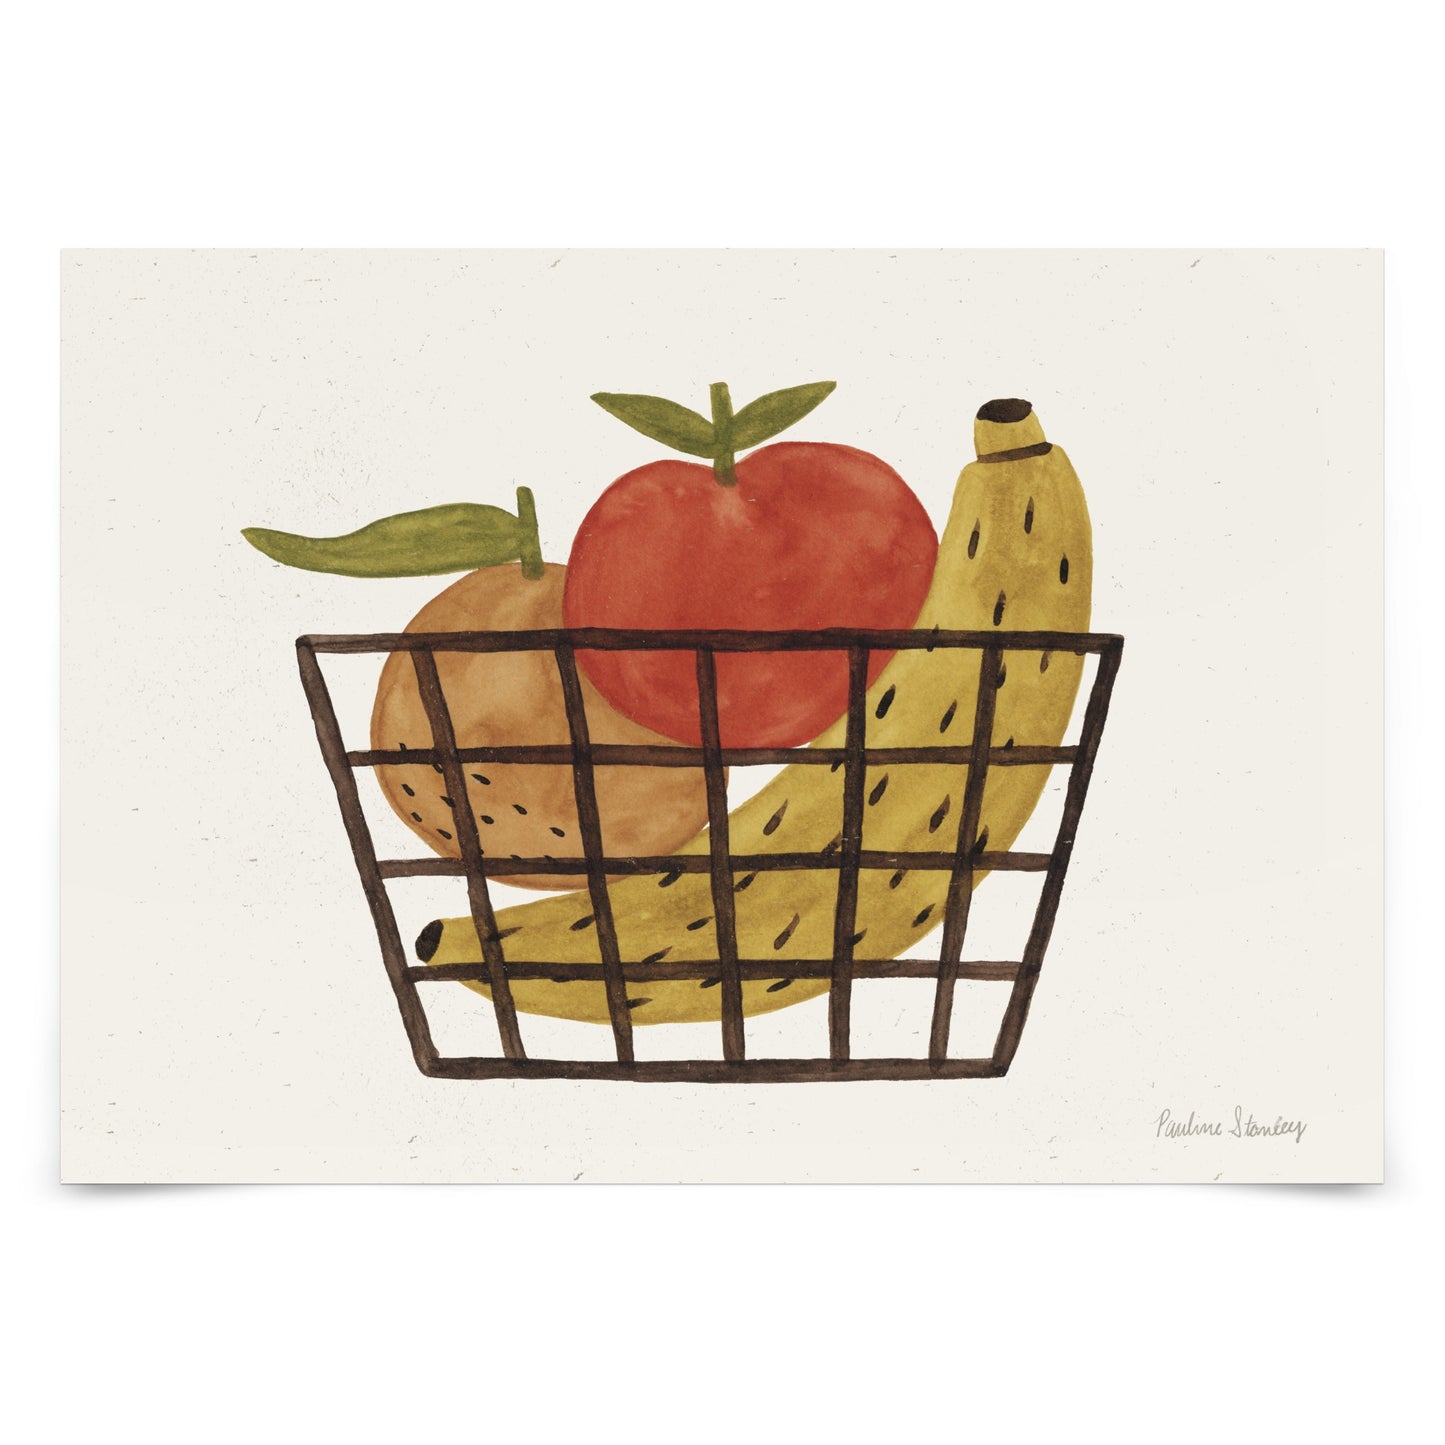 Fruit Basket Watercolor by Pauline Stanley - Poster, Poster, 8" X 10"